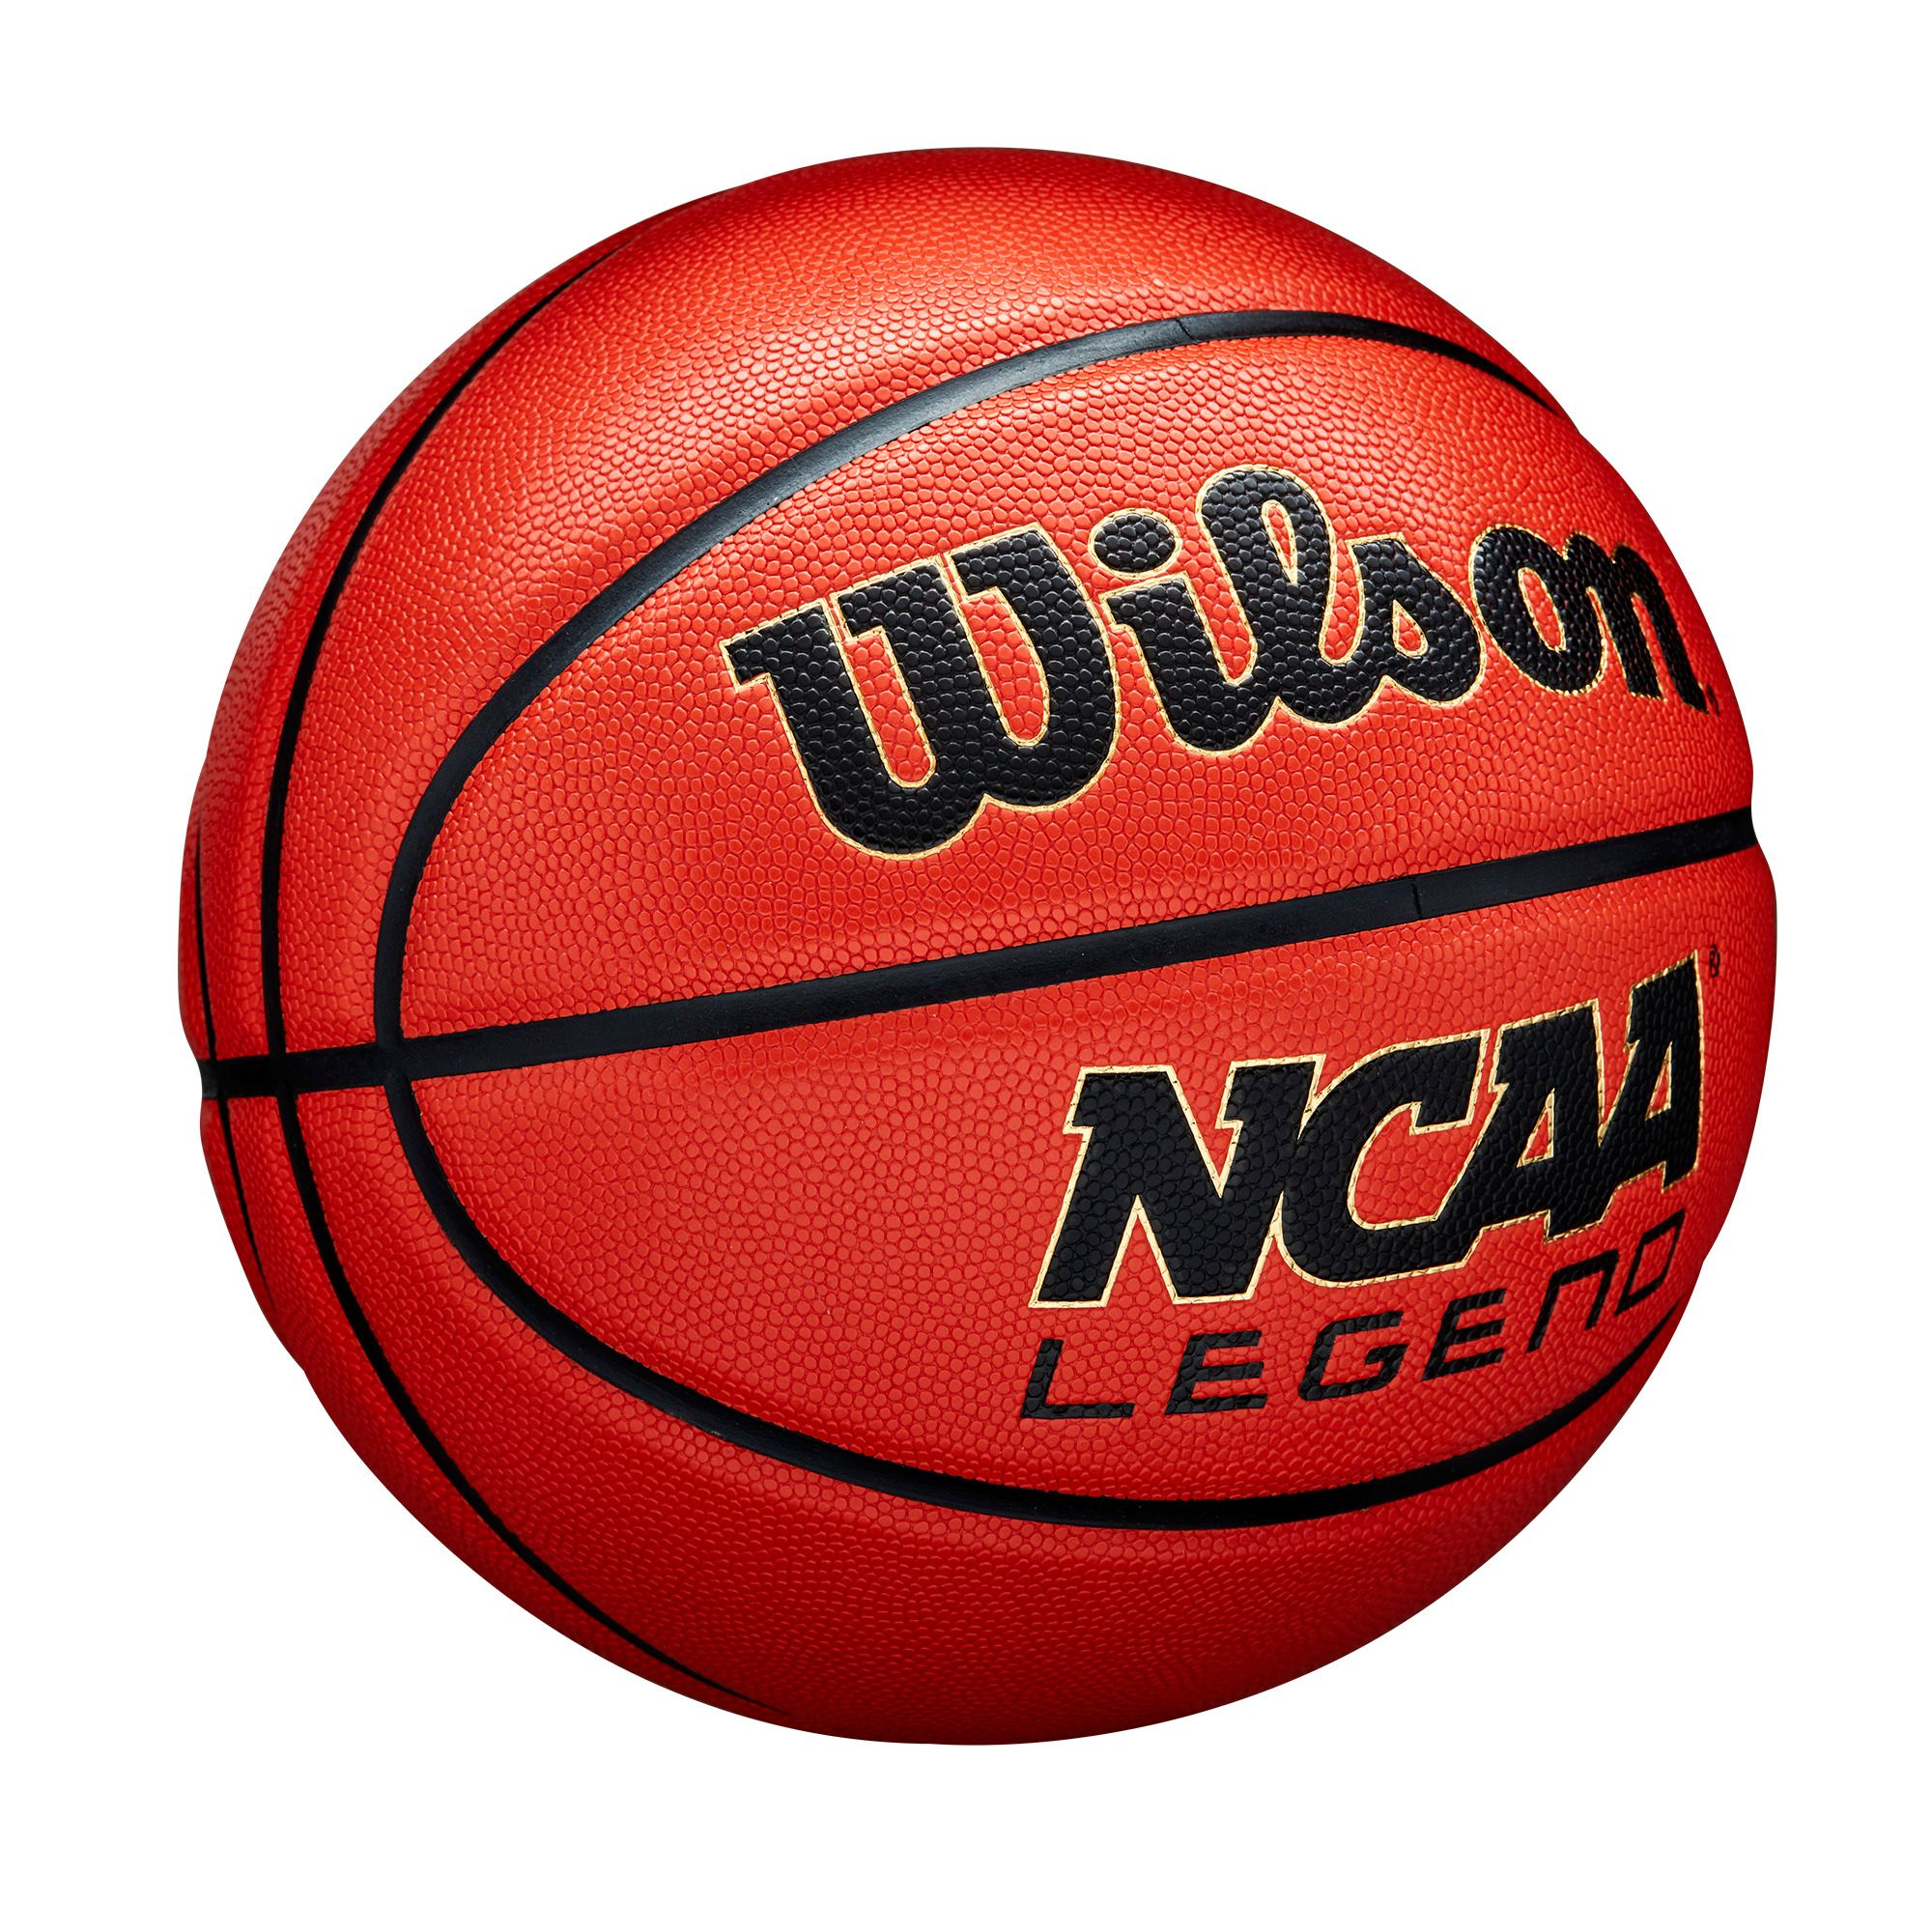 Dick's Sporting Goods Wilson NCAA Legend Basketball | The Market Place